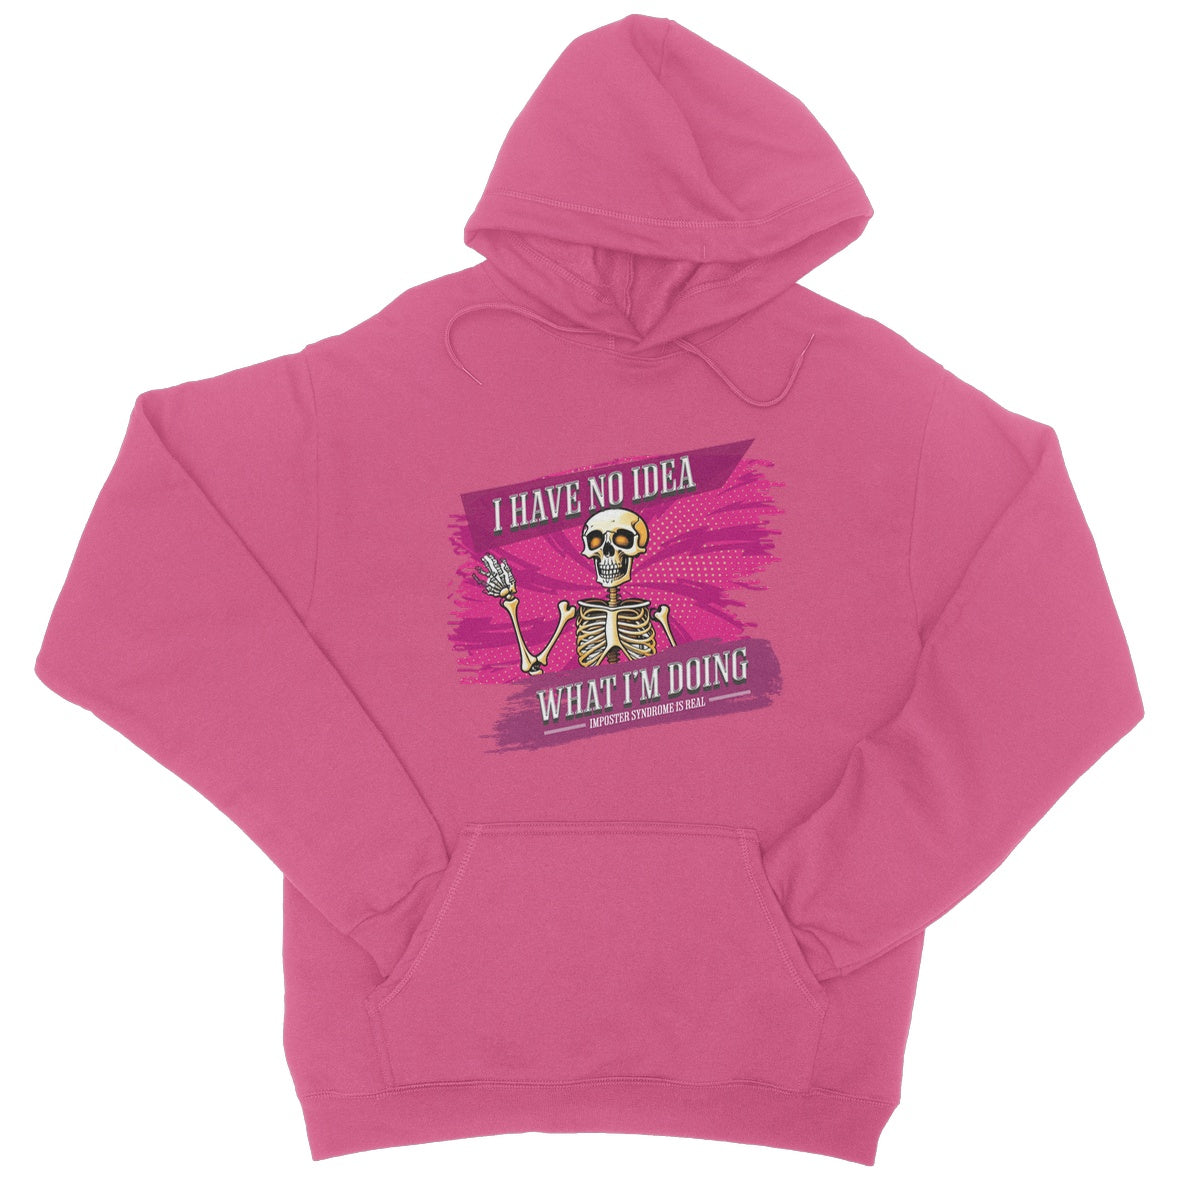 I have no idea what im doing hoodie pink